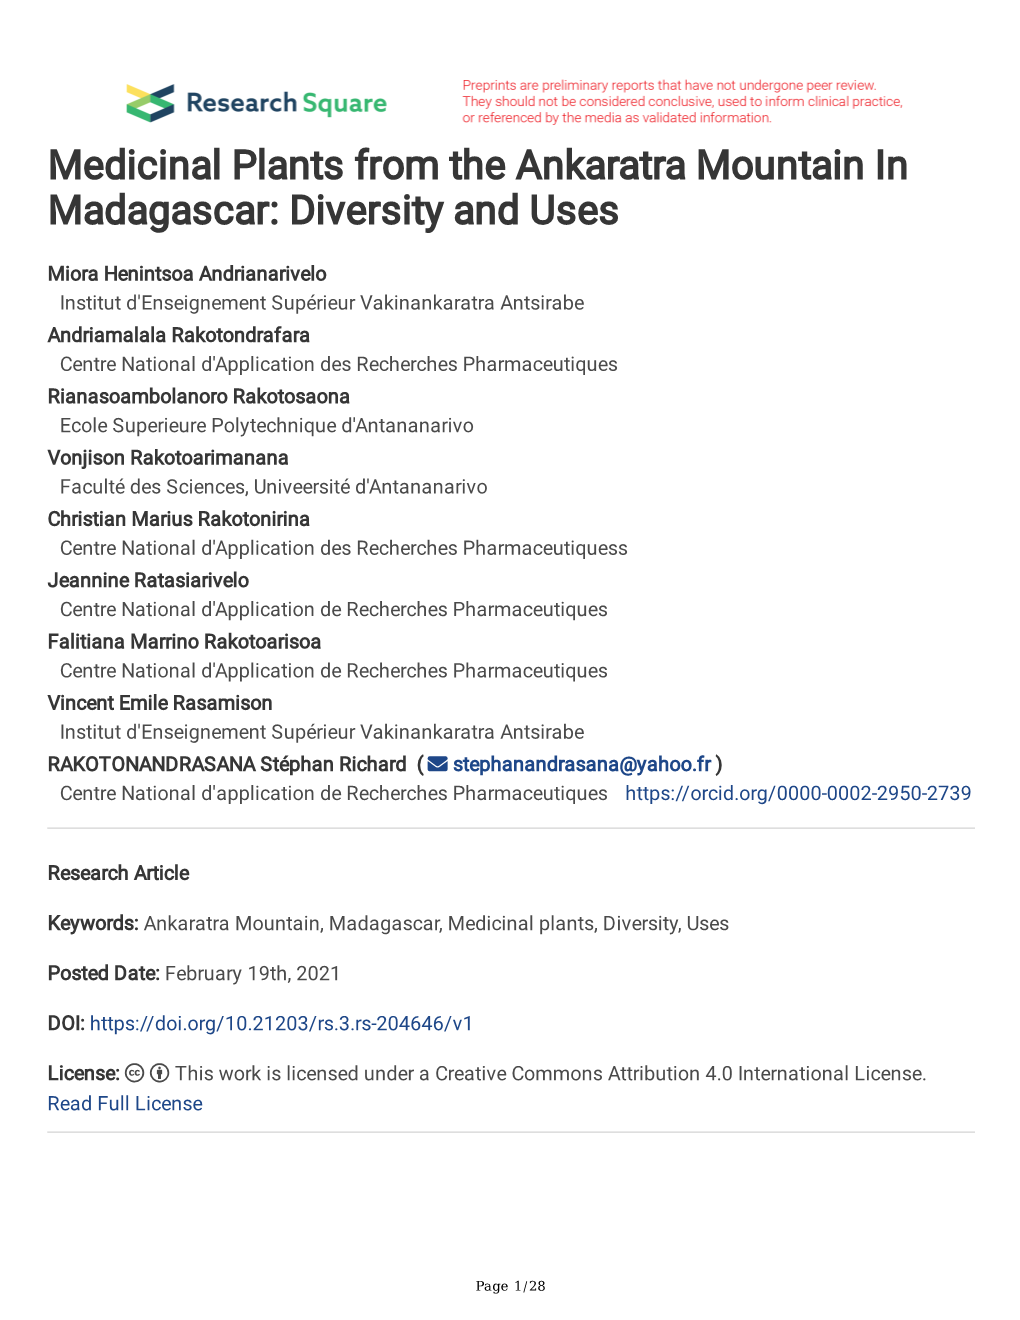 Medicinal Plants from the Ankaratra Mountain in Madagascar: Diversity and Uses